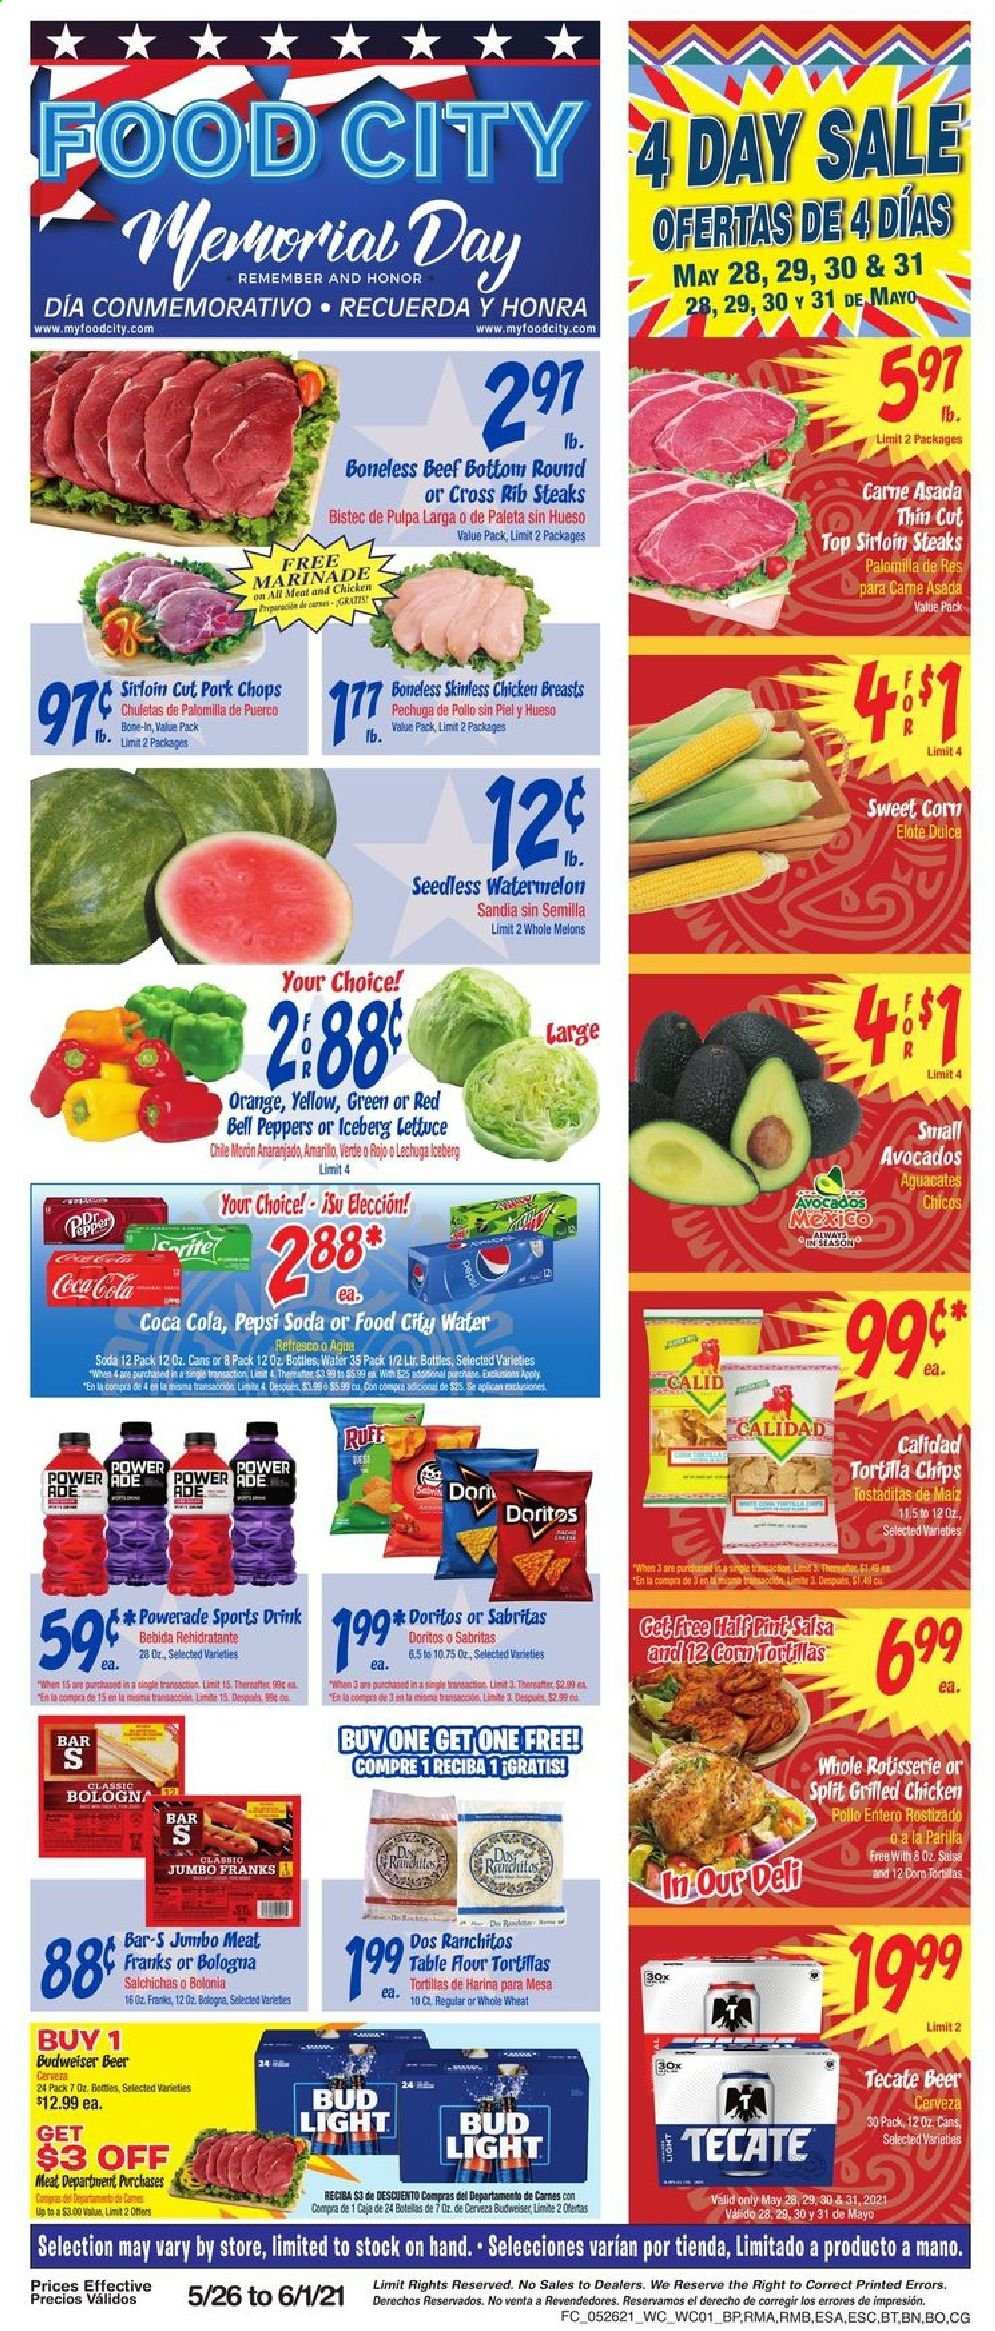 thumbnail - Food City Flyer - 05/26/2021 - 06/01/2021 - Sales products - Budweiser, flour tortillas, bell peppers, lettuce, peppers, avocado, watermelon, bologna sausage, Doritos, tortilla chips, chips, salsa, marinade, Coca-Cola, Powerade, Pepsi, soda, beer, Bud Light, chicken breasts, steak, sirloin steak, pork chops, pork meat, melons. Page 1.